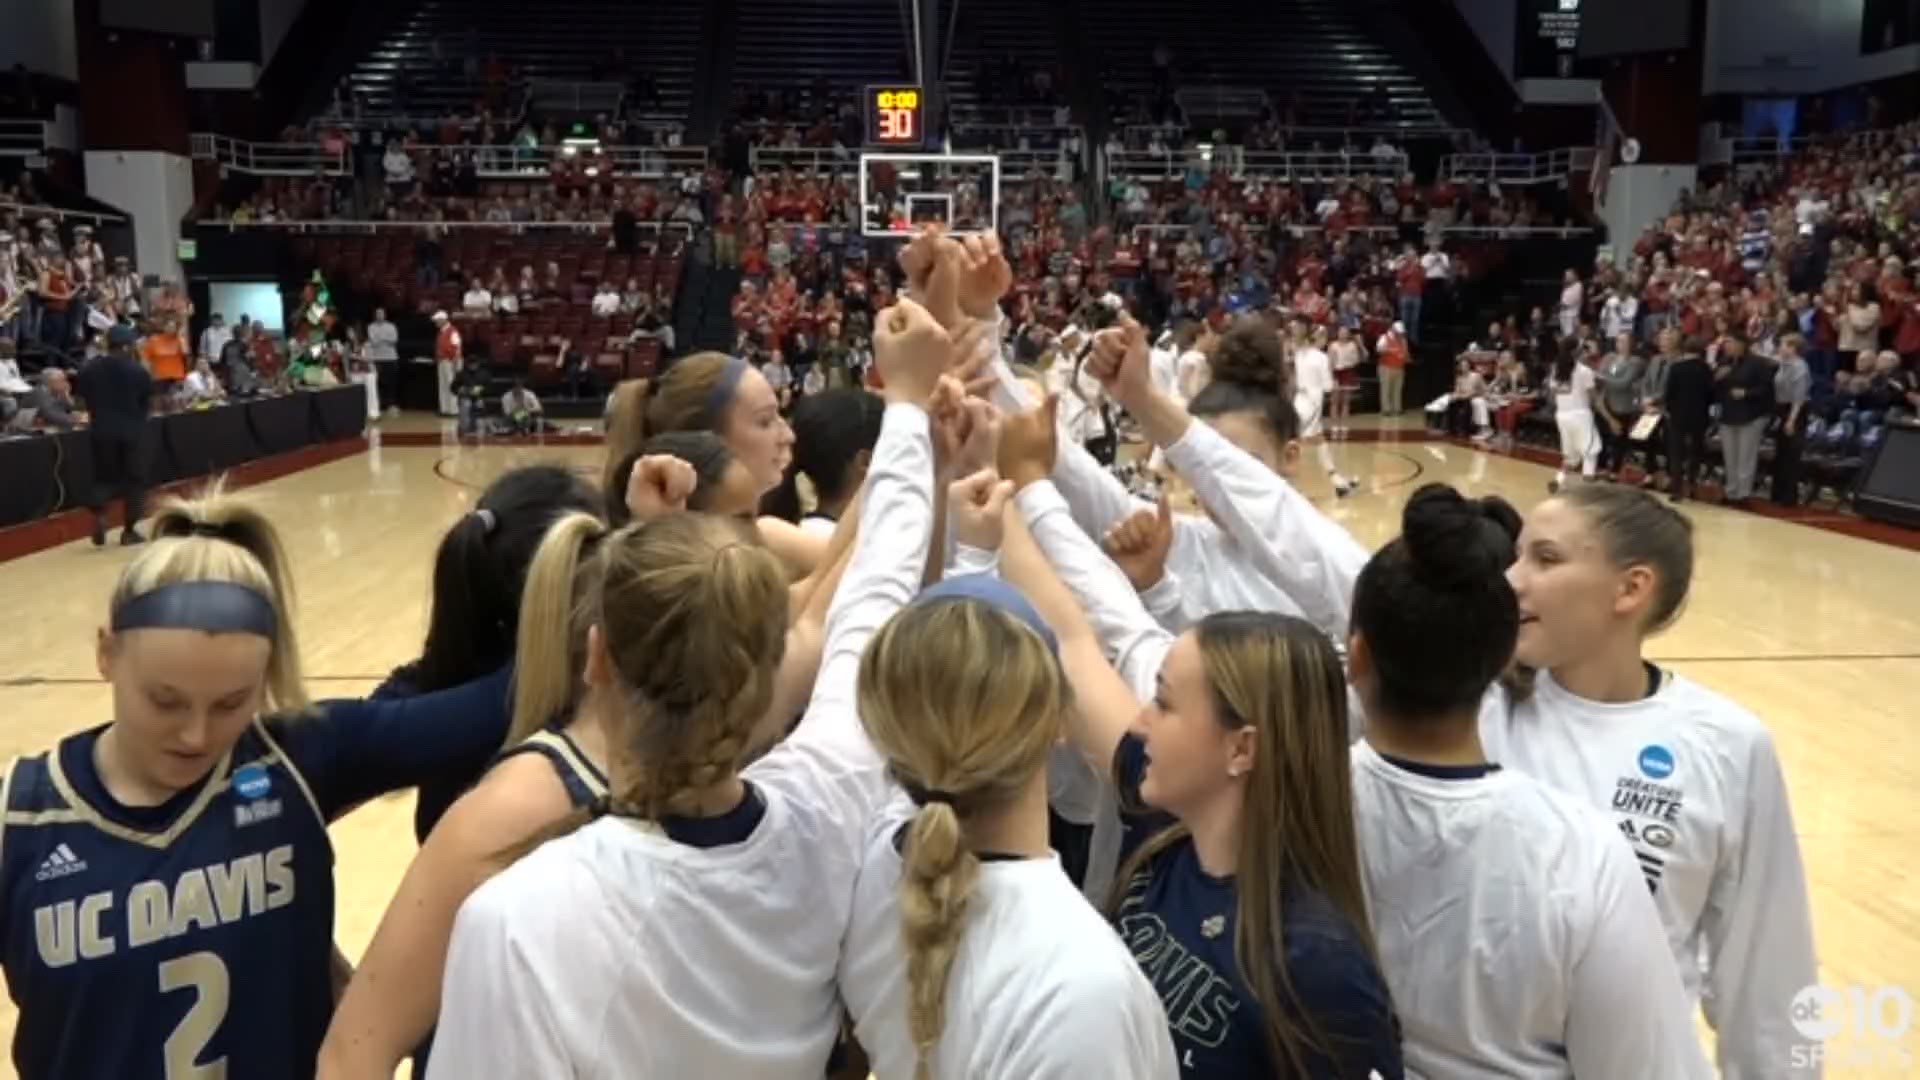 The UC Davis Aggies season comes to an end in the First Round of the Women's NCAA Tournament after a 79-54 loss to No. 6 Stanford